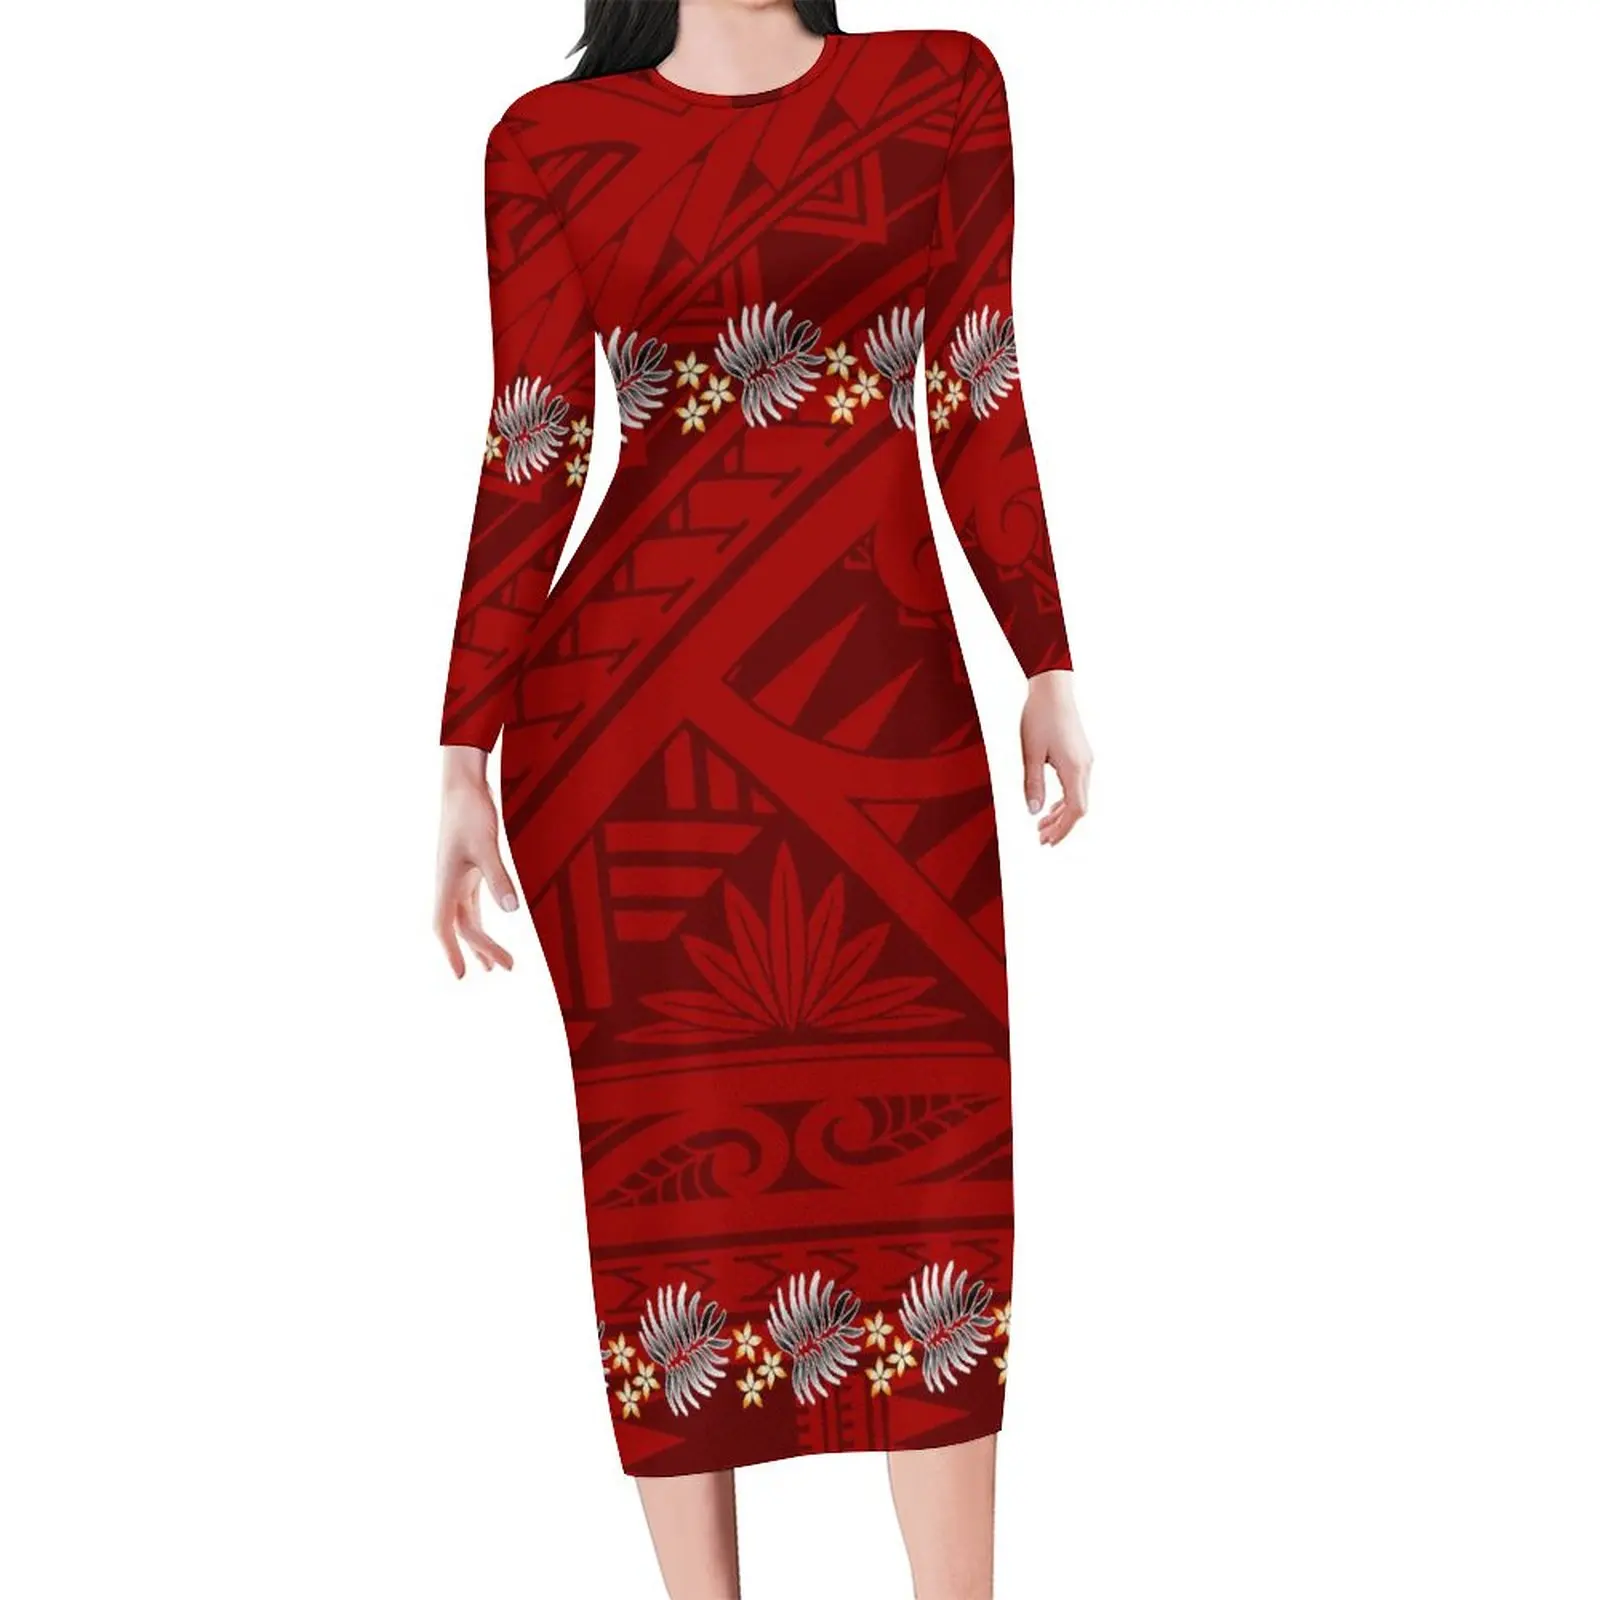 

Support Your Design Women'S Long Sleeve Dress Polynesian Tribe Design Slim-Fit Dress Free Shipping